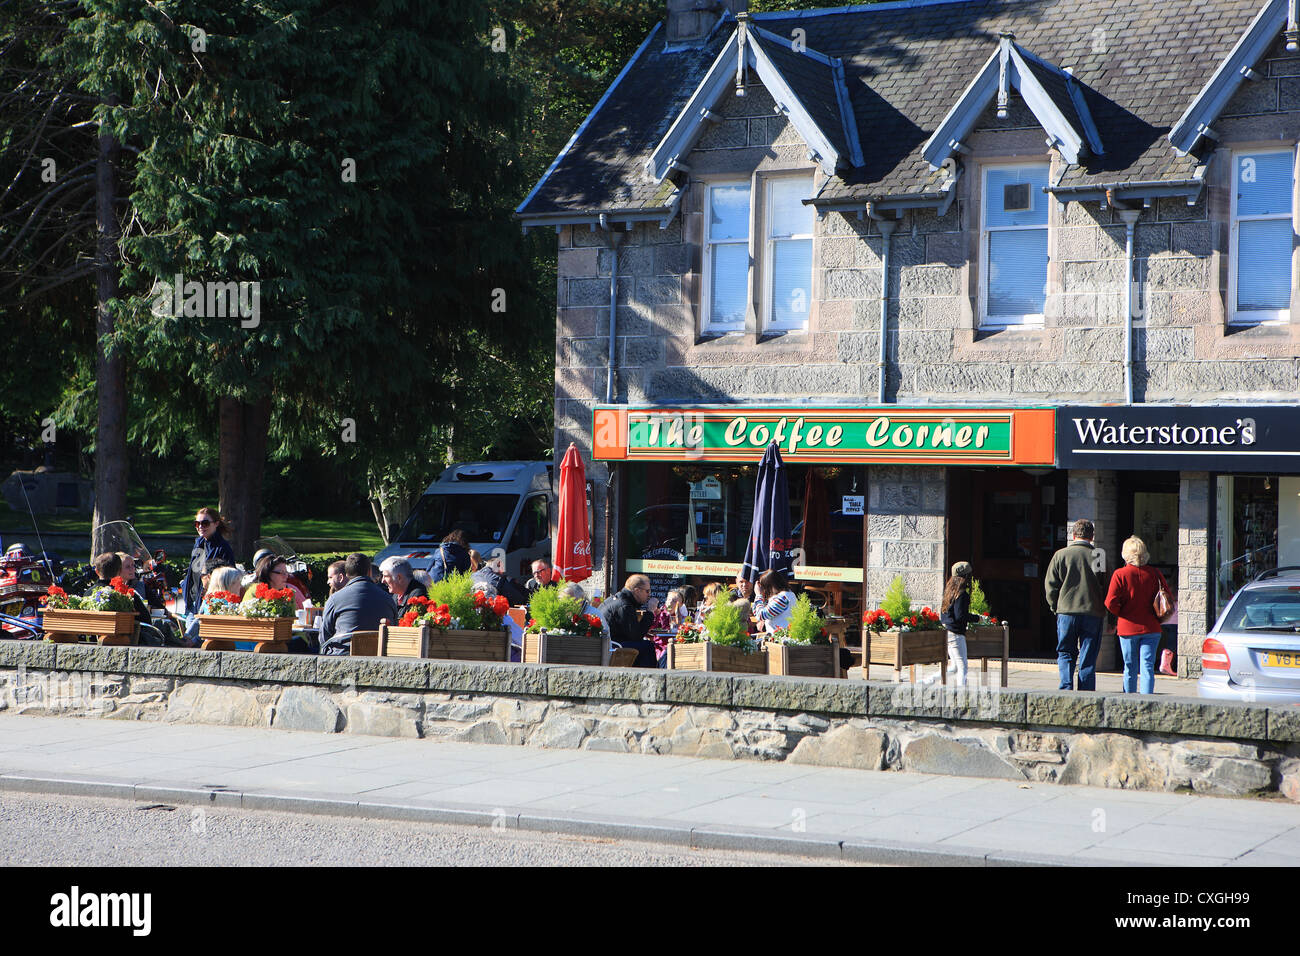 Aviemore - People sitting in the autumn sunshine outside a cafe in Aviemore in the Scottish Highlands Stock Photo